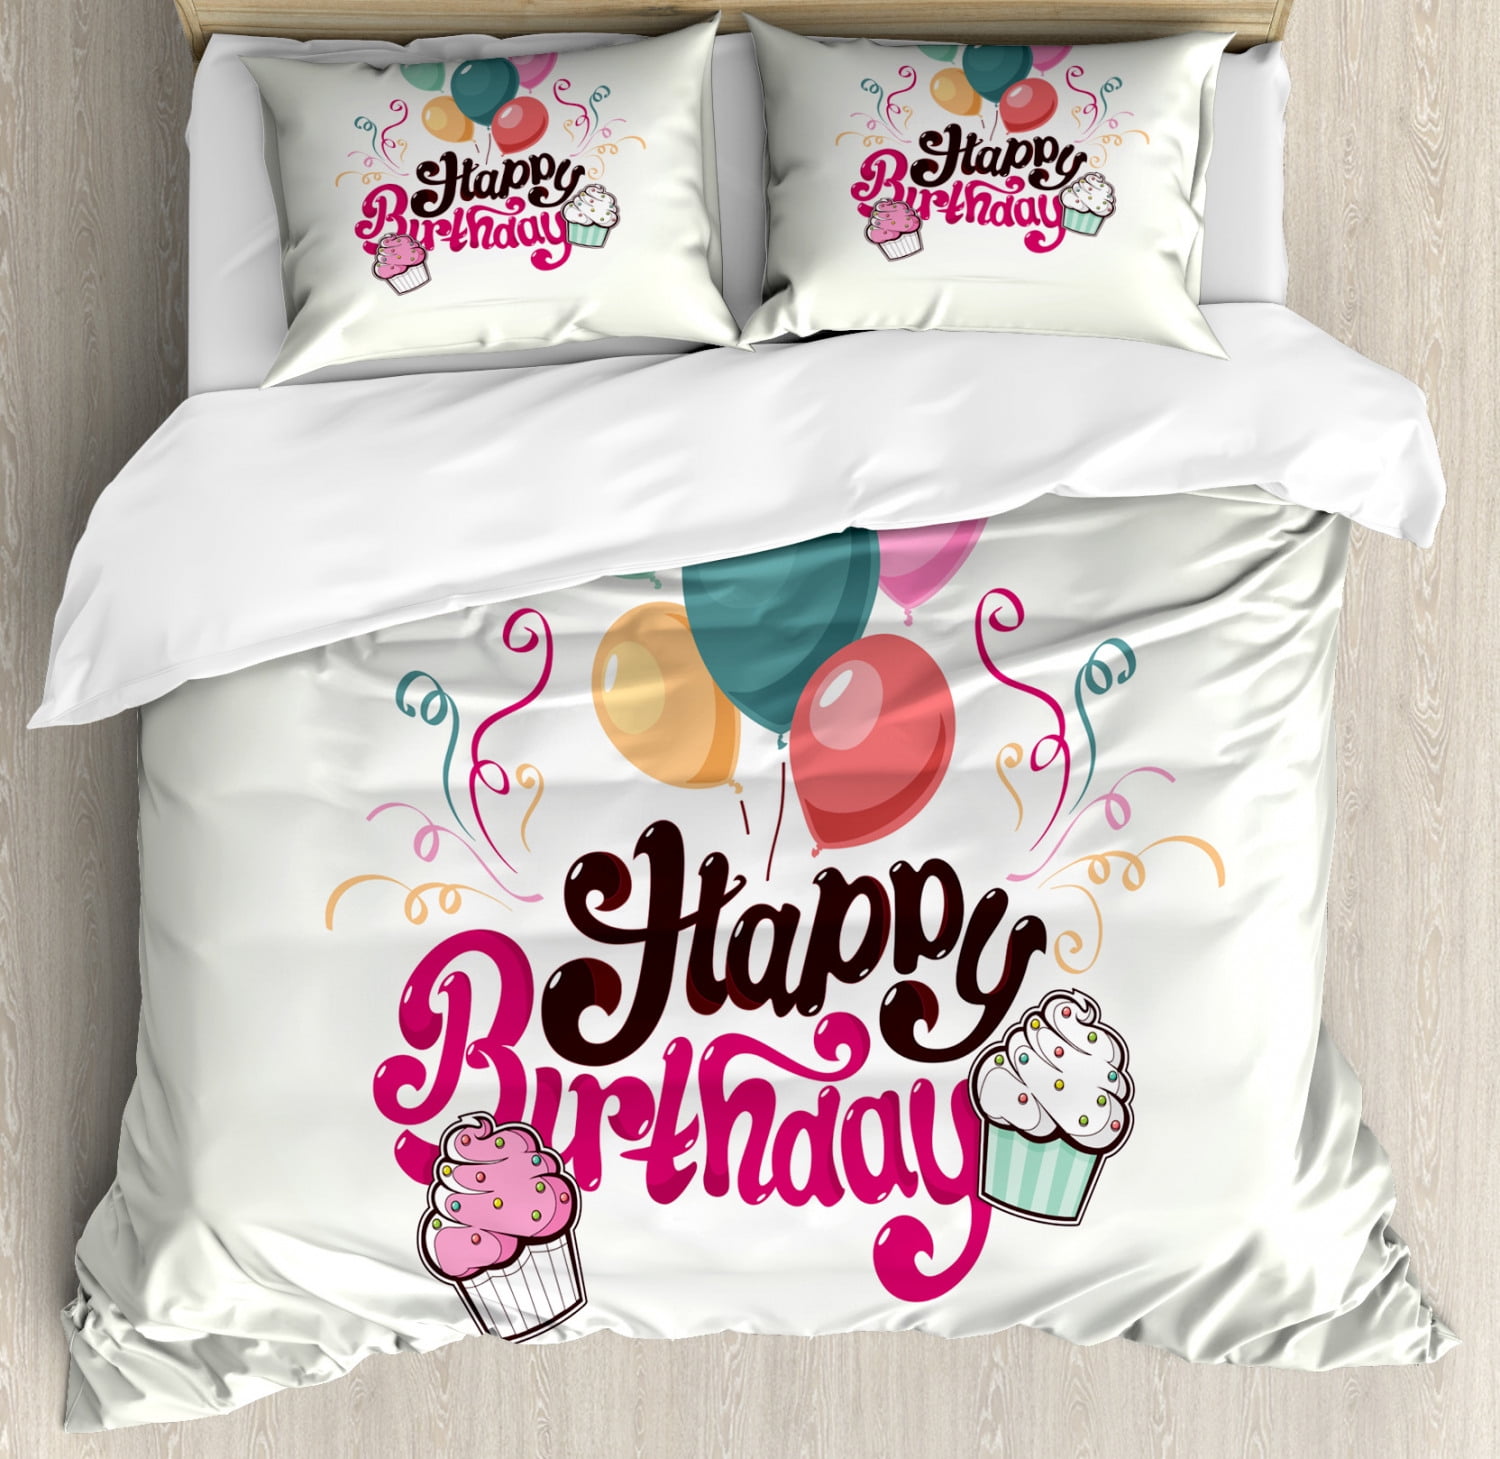 Cupcake Duvet Cover Set Queen Size Happy Birthday Typography With